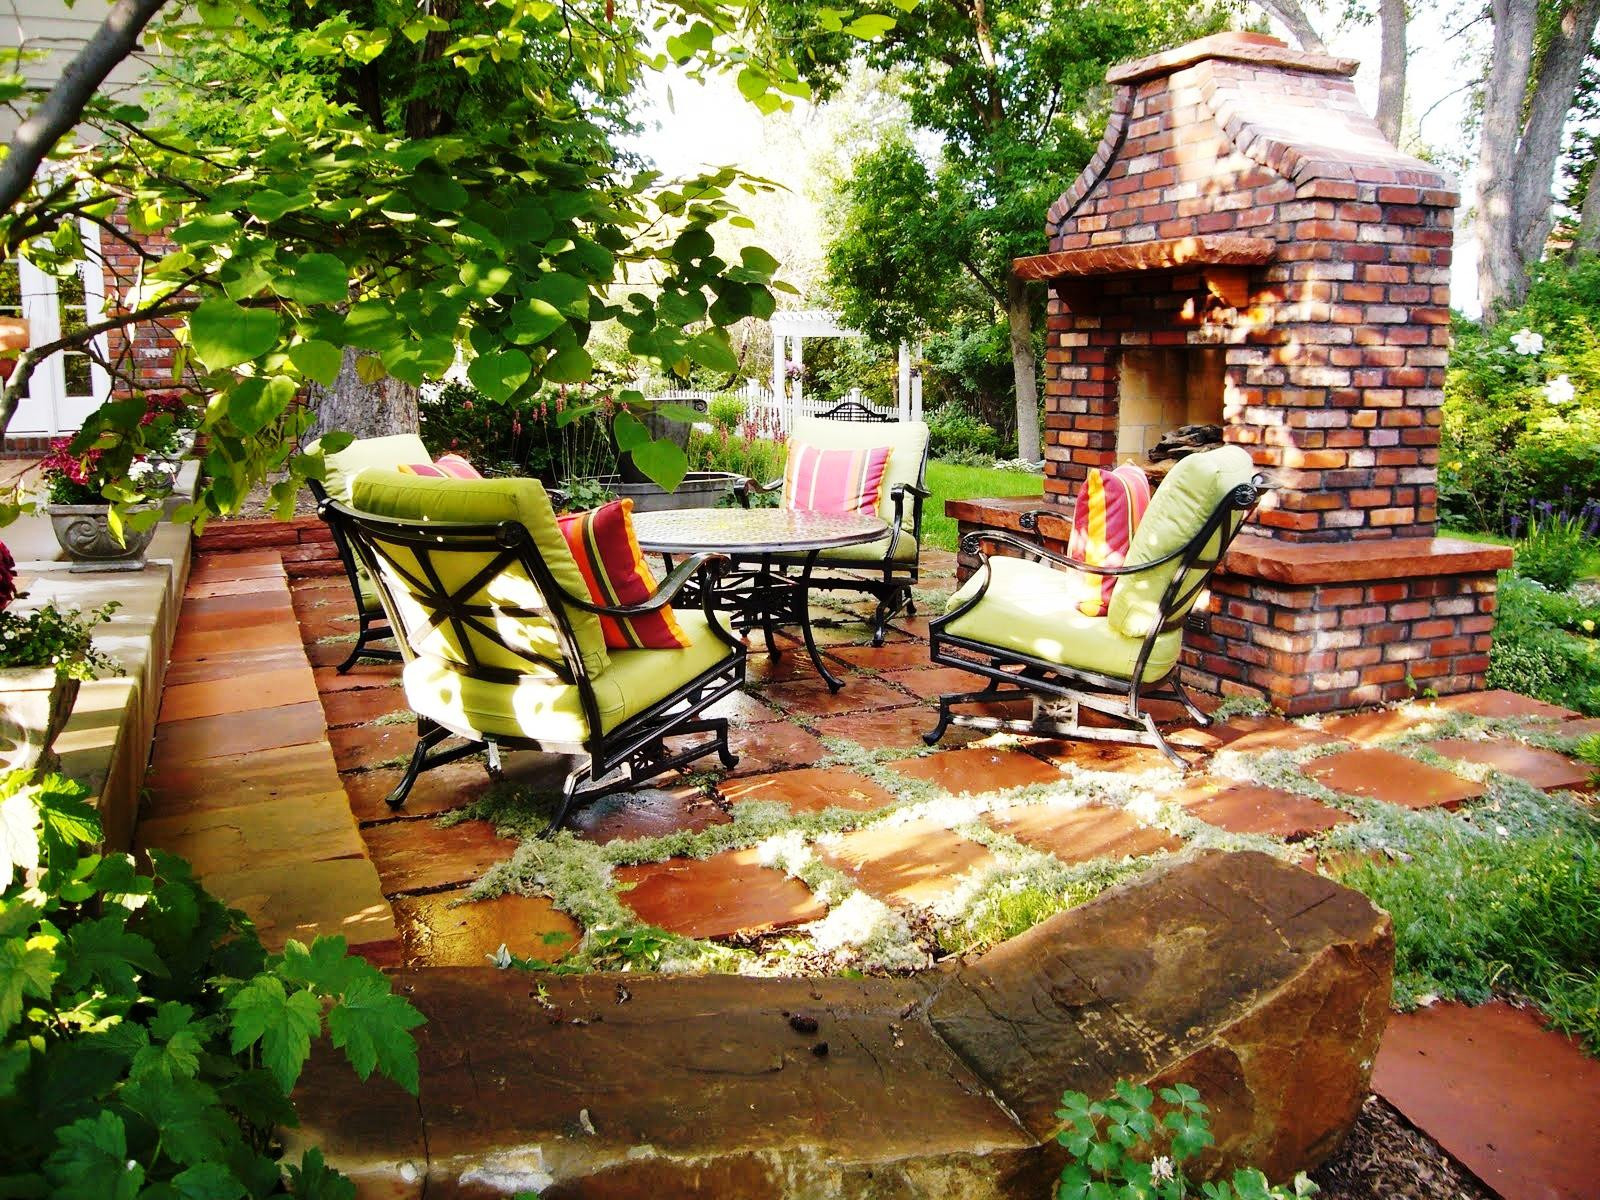 Backyard Deck And Patio Ideas
 What You Need To Think Before Deciding The Backyard Patio